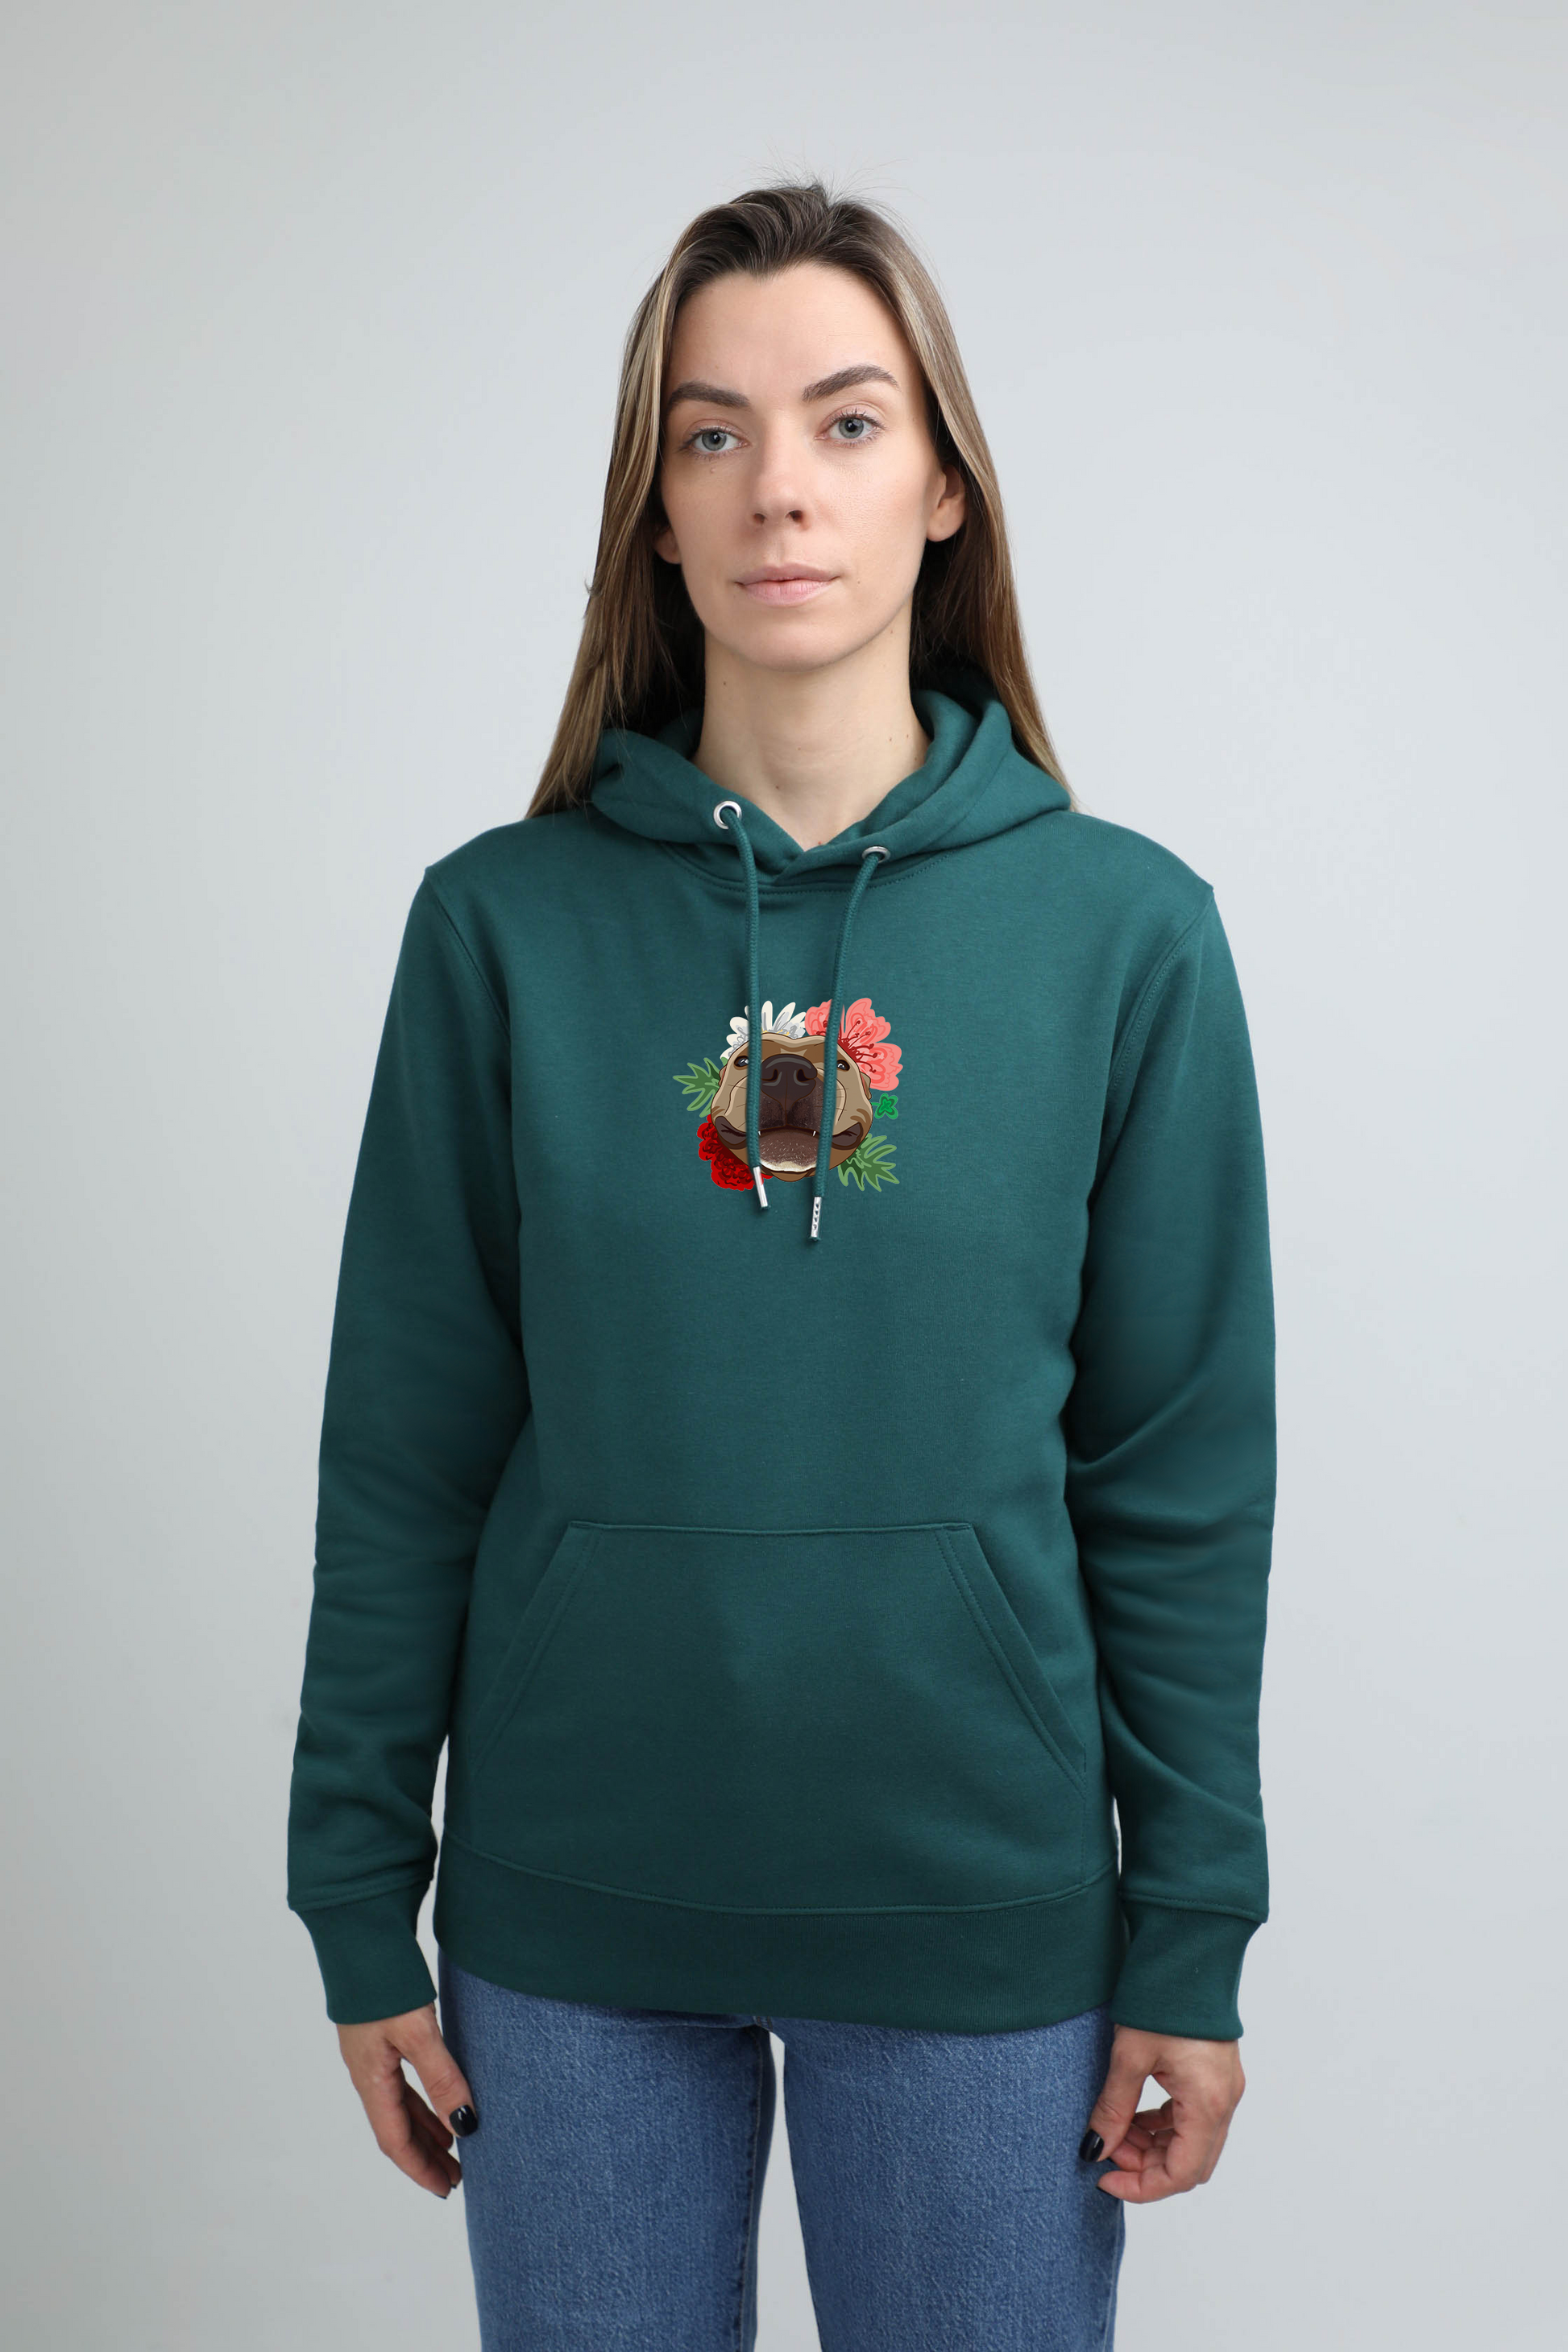 Serious dog with flowers | Hoodie with dog. Regular fit | Unisex - premium dog goods handmade in Europe by animalistus